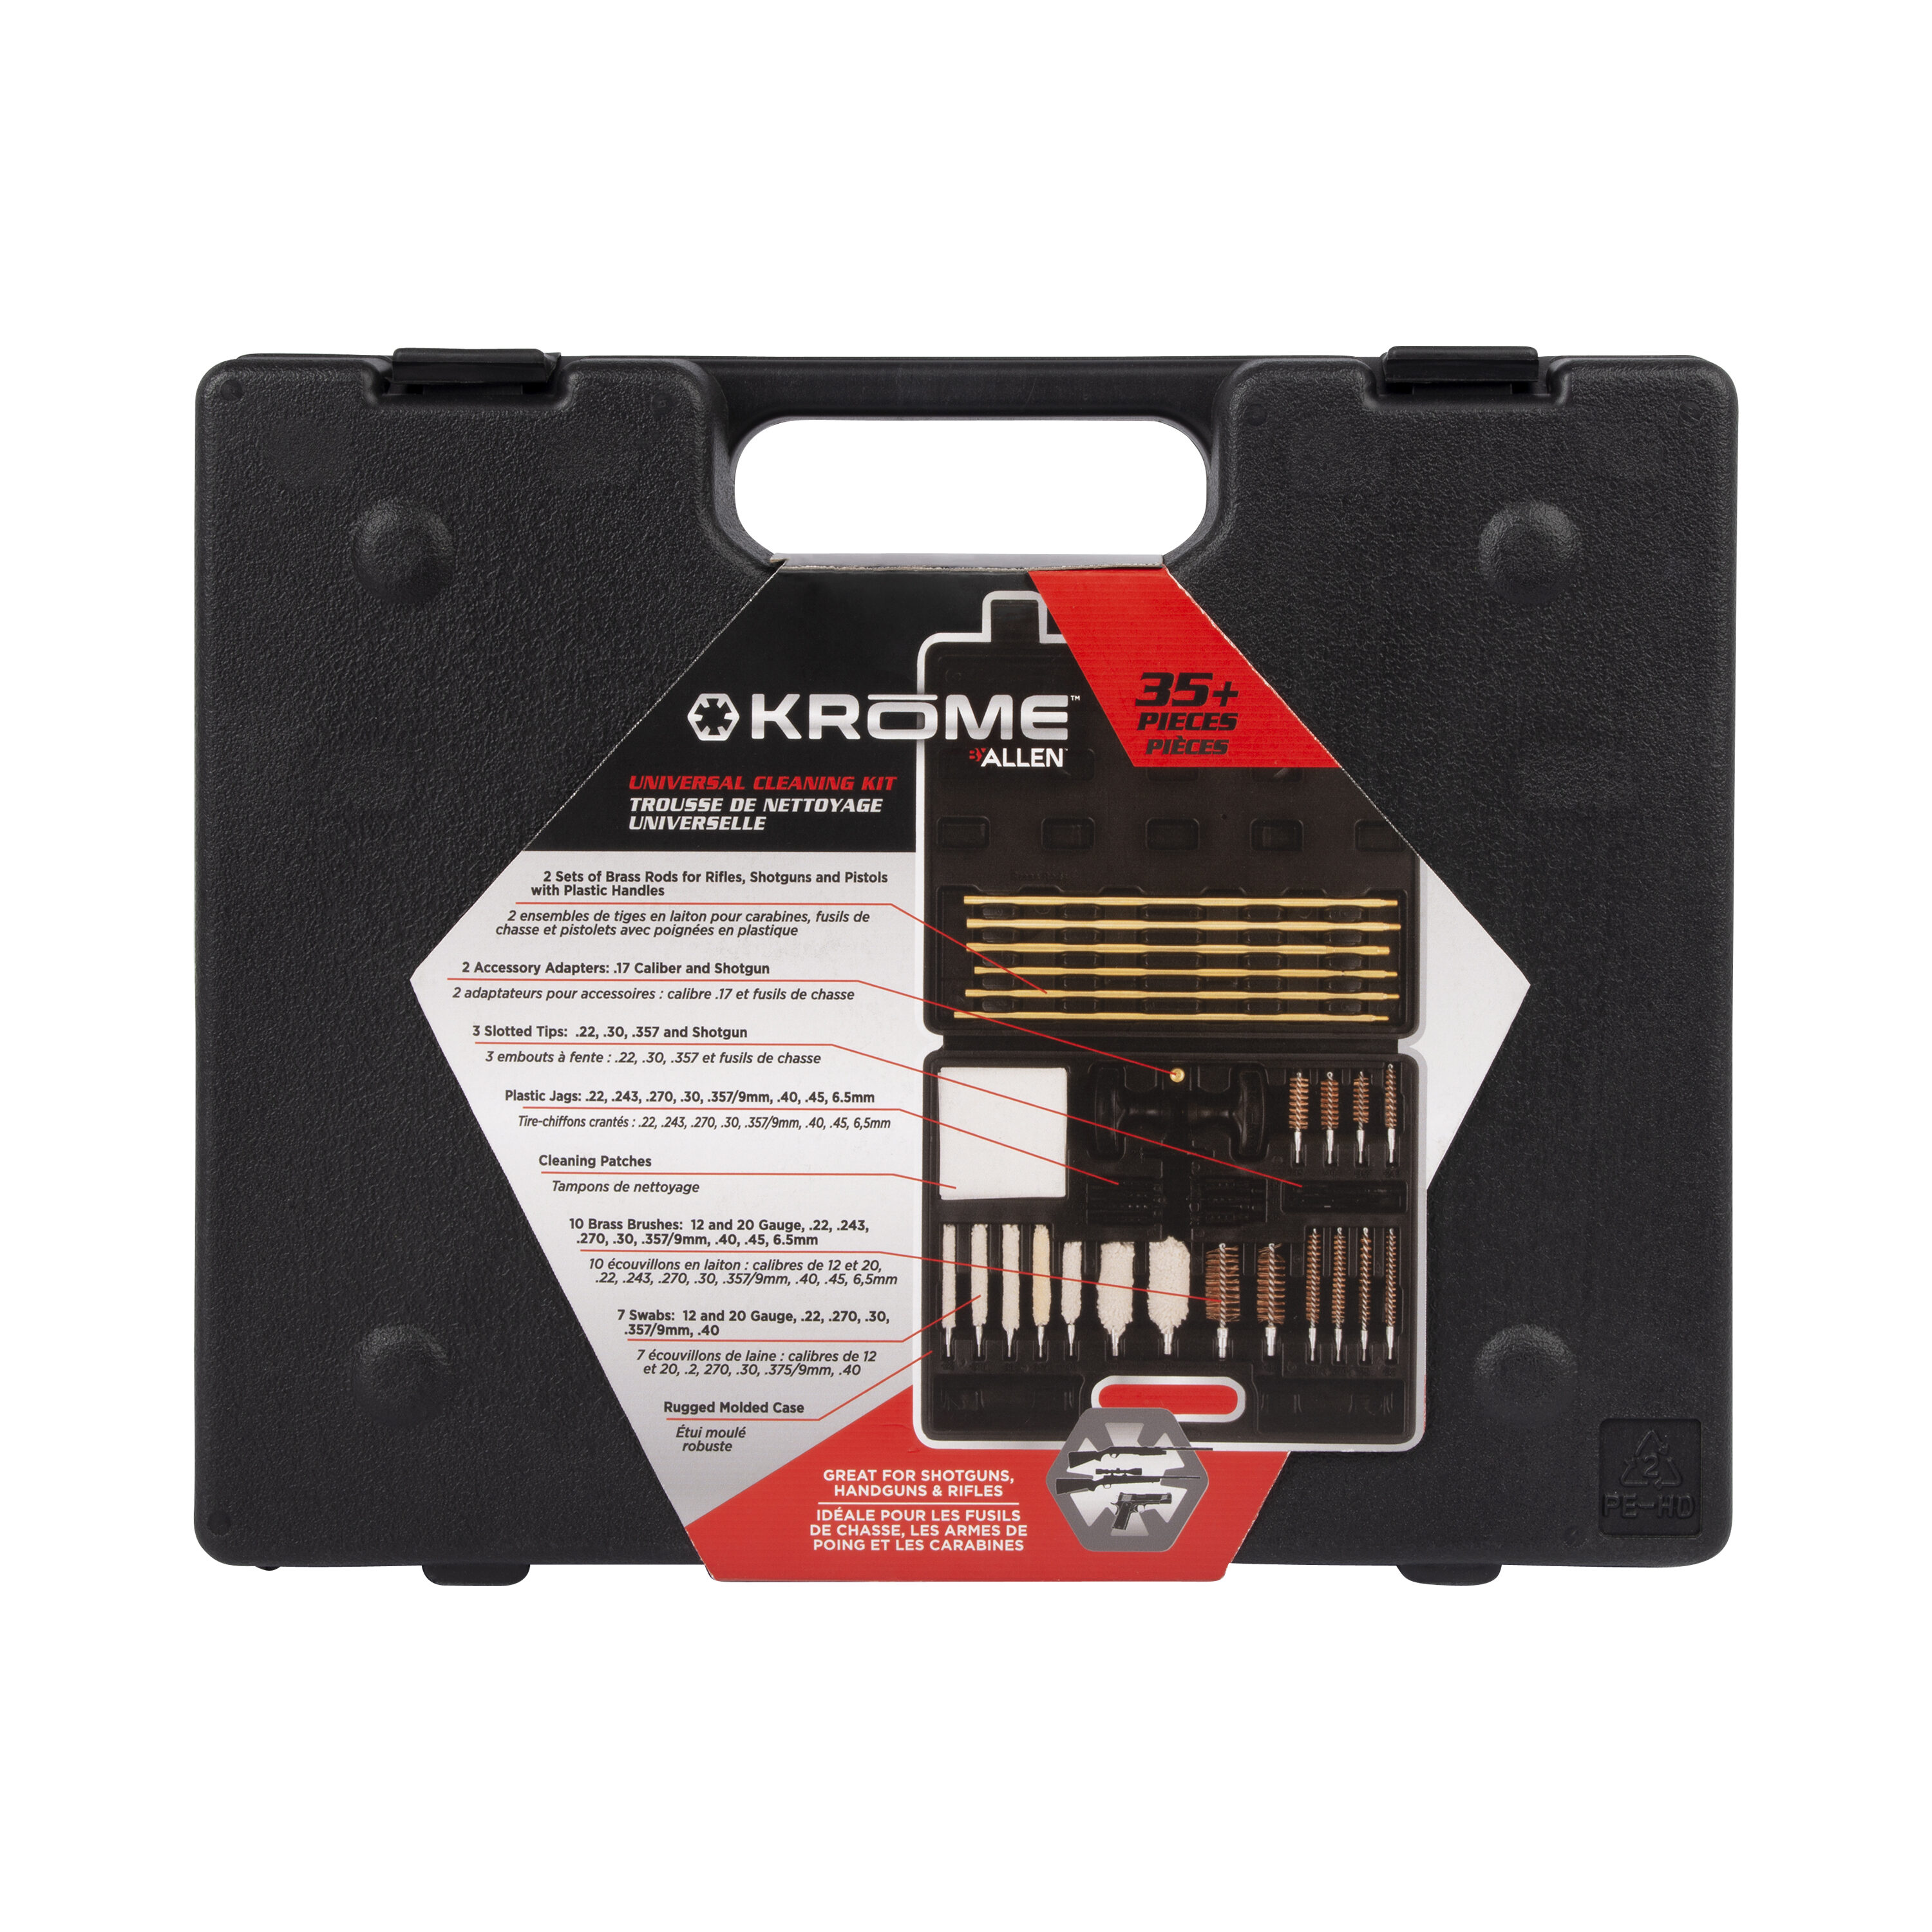 Krome Otis Technology Gun Cleaning Kit - Brass Rods for Shotgun, Rifles,  and Pistols - Cotton Swabs and Brushes for Various Calibers in the Hunting  Equipment & Apparel department at